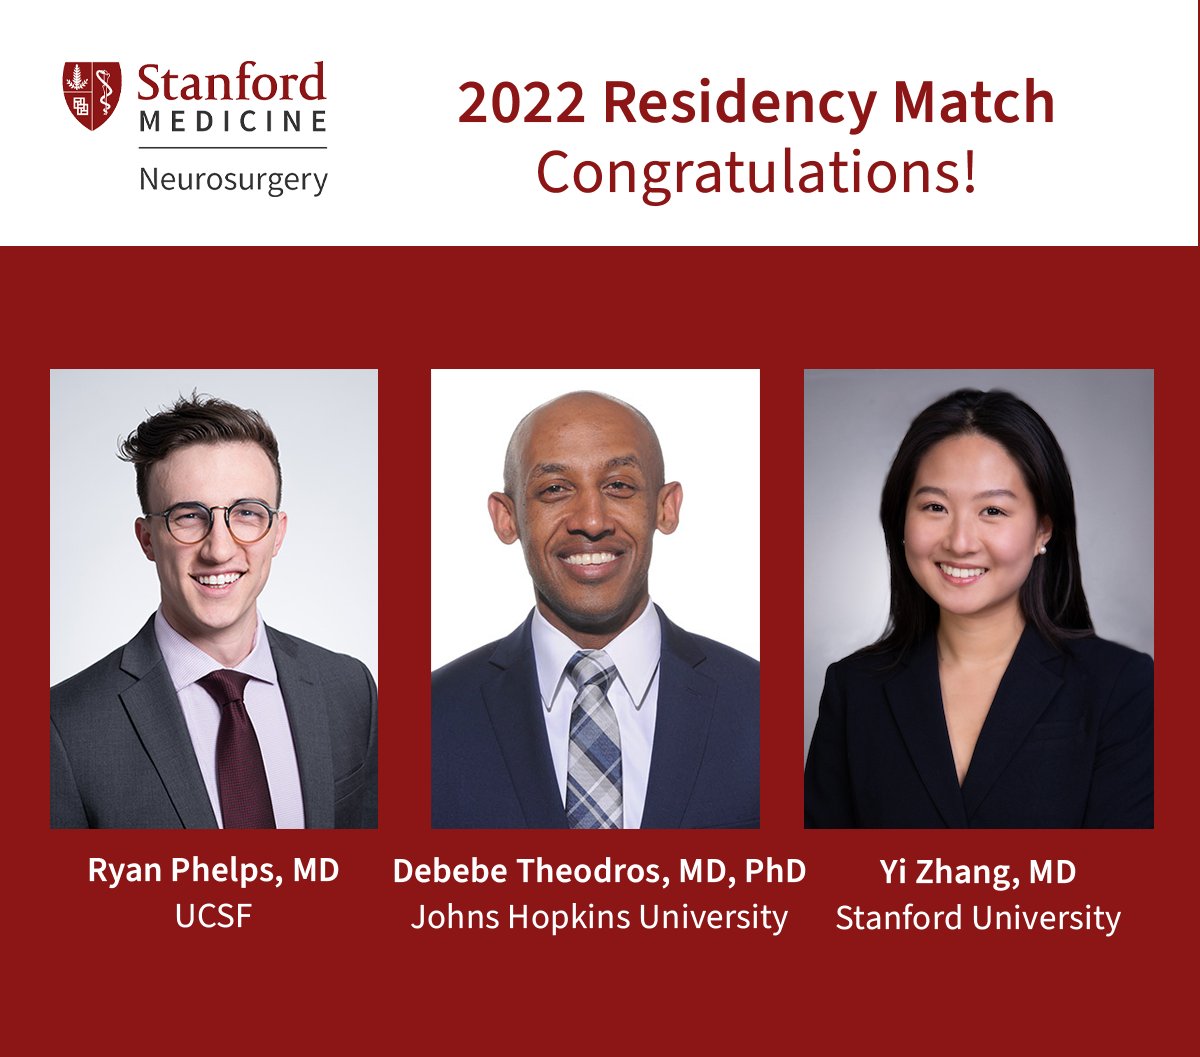 Congratulations to Drs. Ryan Phelps, Debebe Theodros, and Yi Zhang, our outstanding group of #Match2022 #FutureNeurosurgeons. Thrilled to welcome you to the Stanford Neurosurgery family! #MatchDay @ryan_rl_phelps @DTheodros